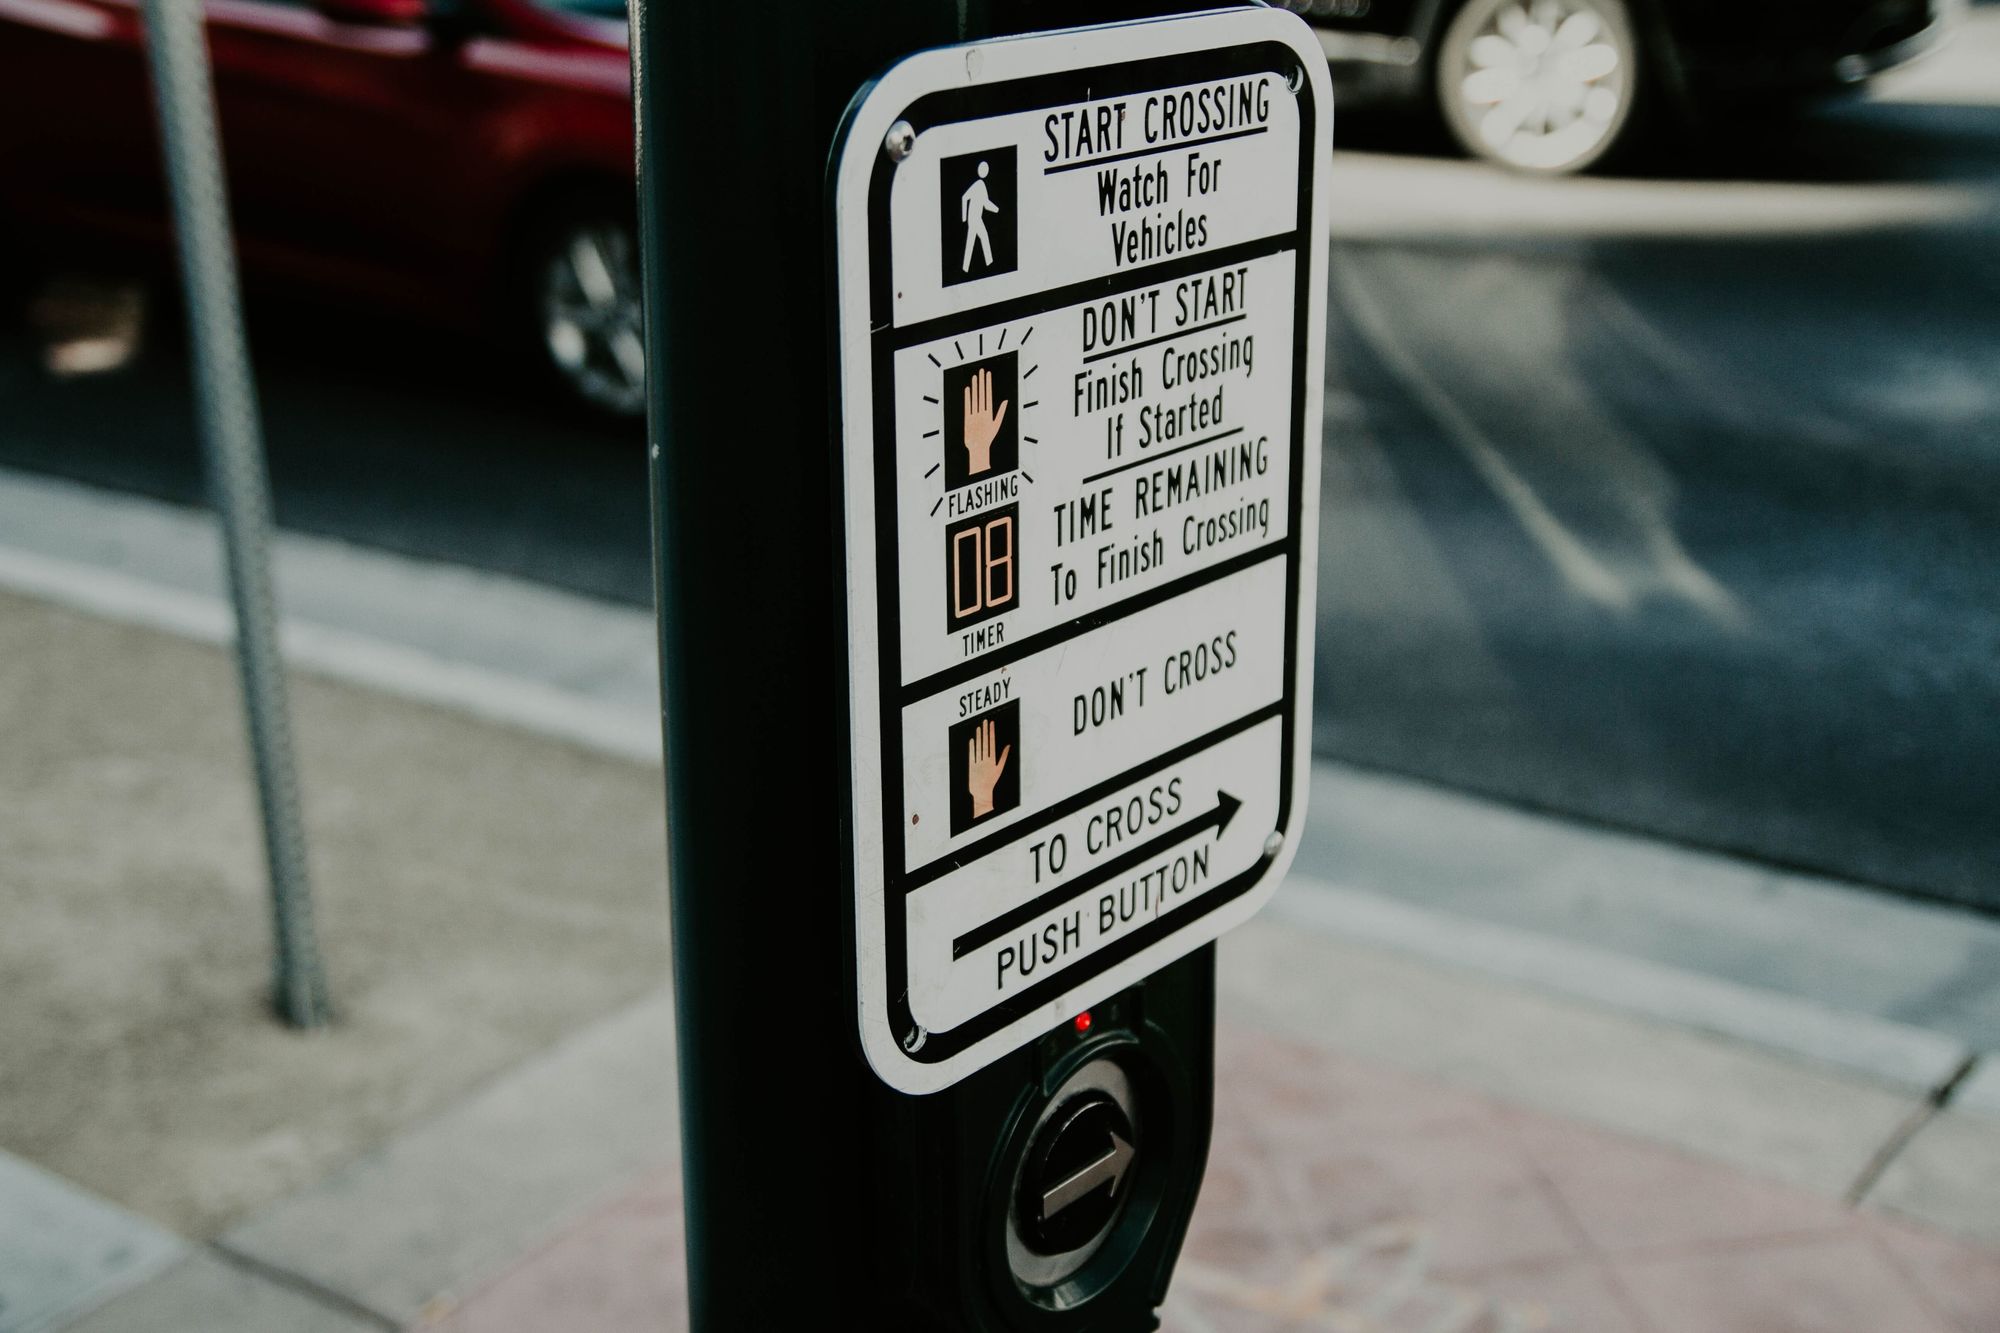 Detailed instructions on a traffic lamp